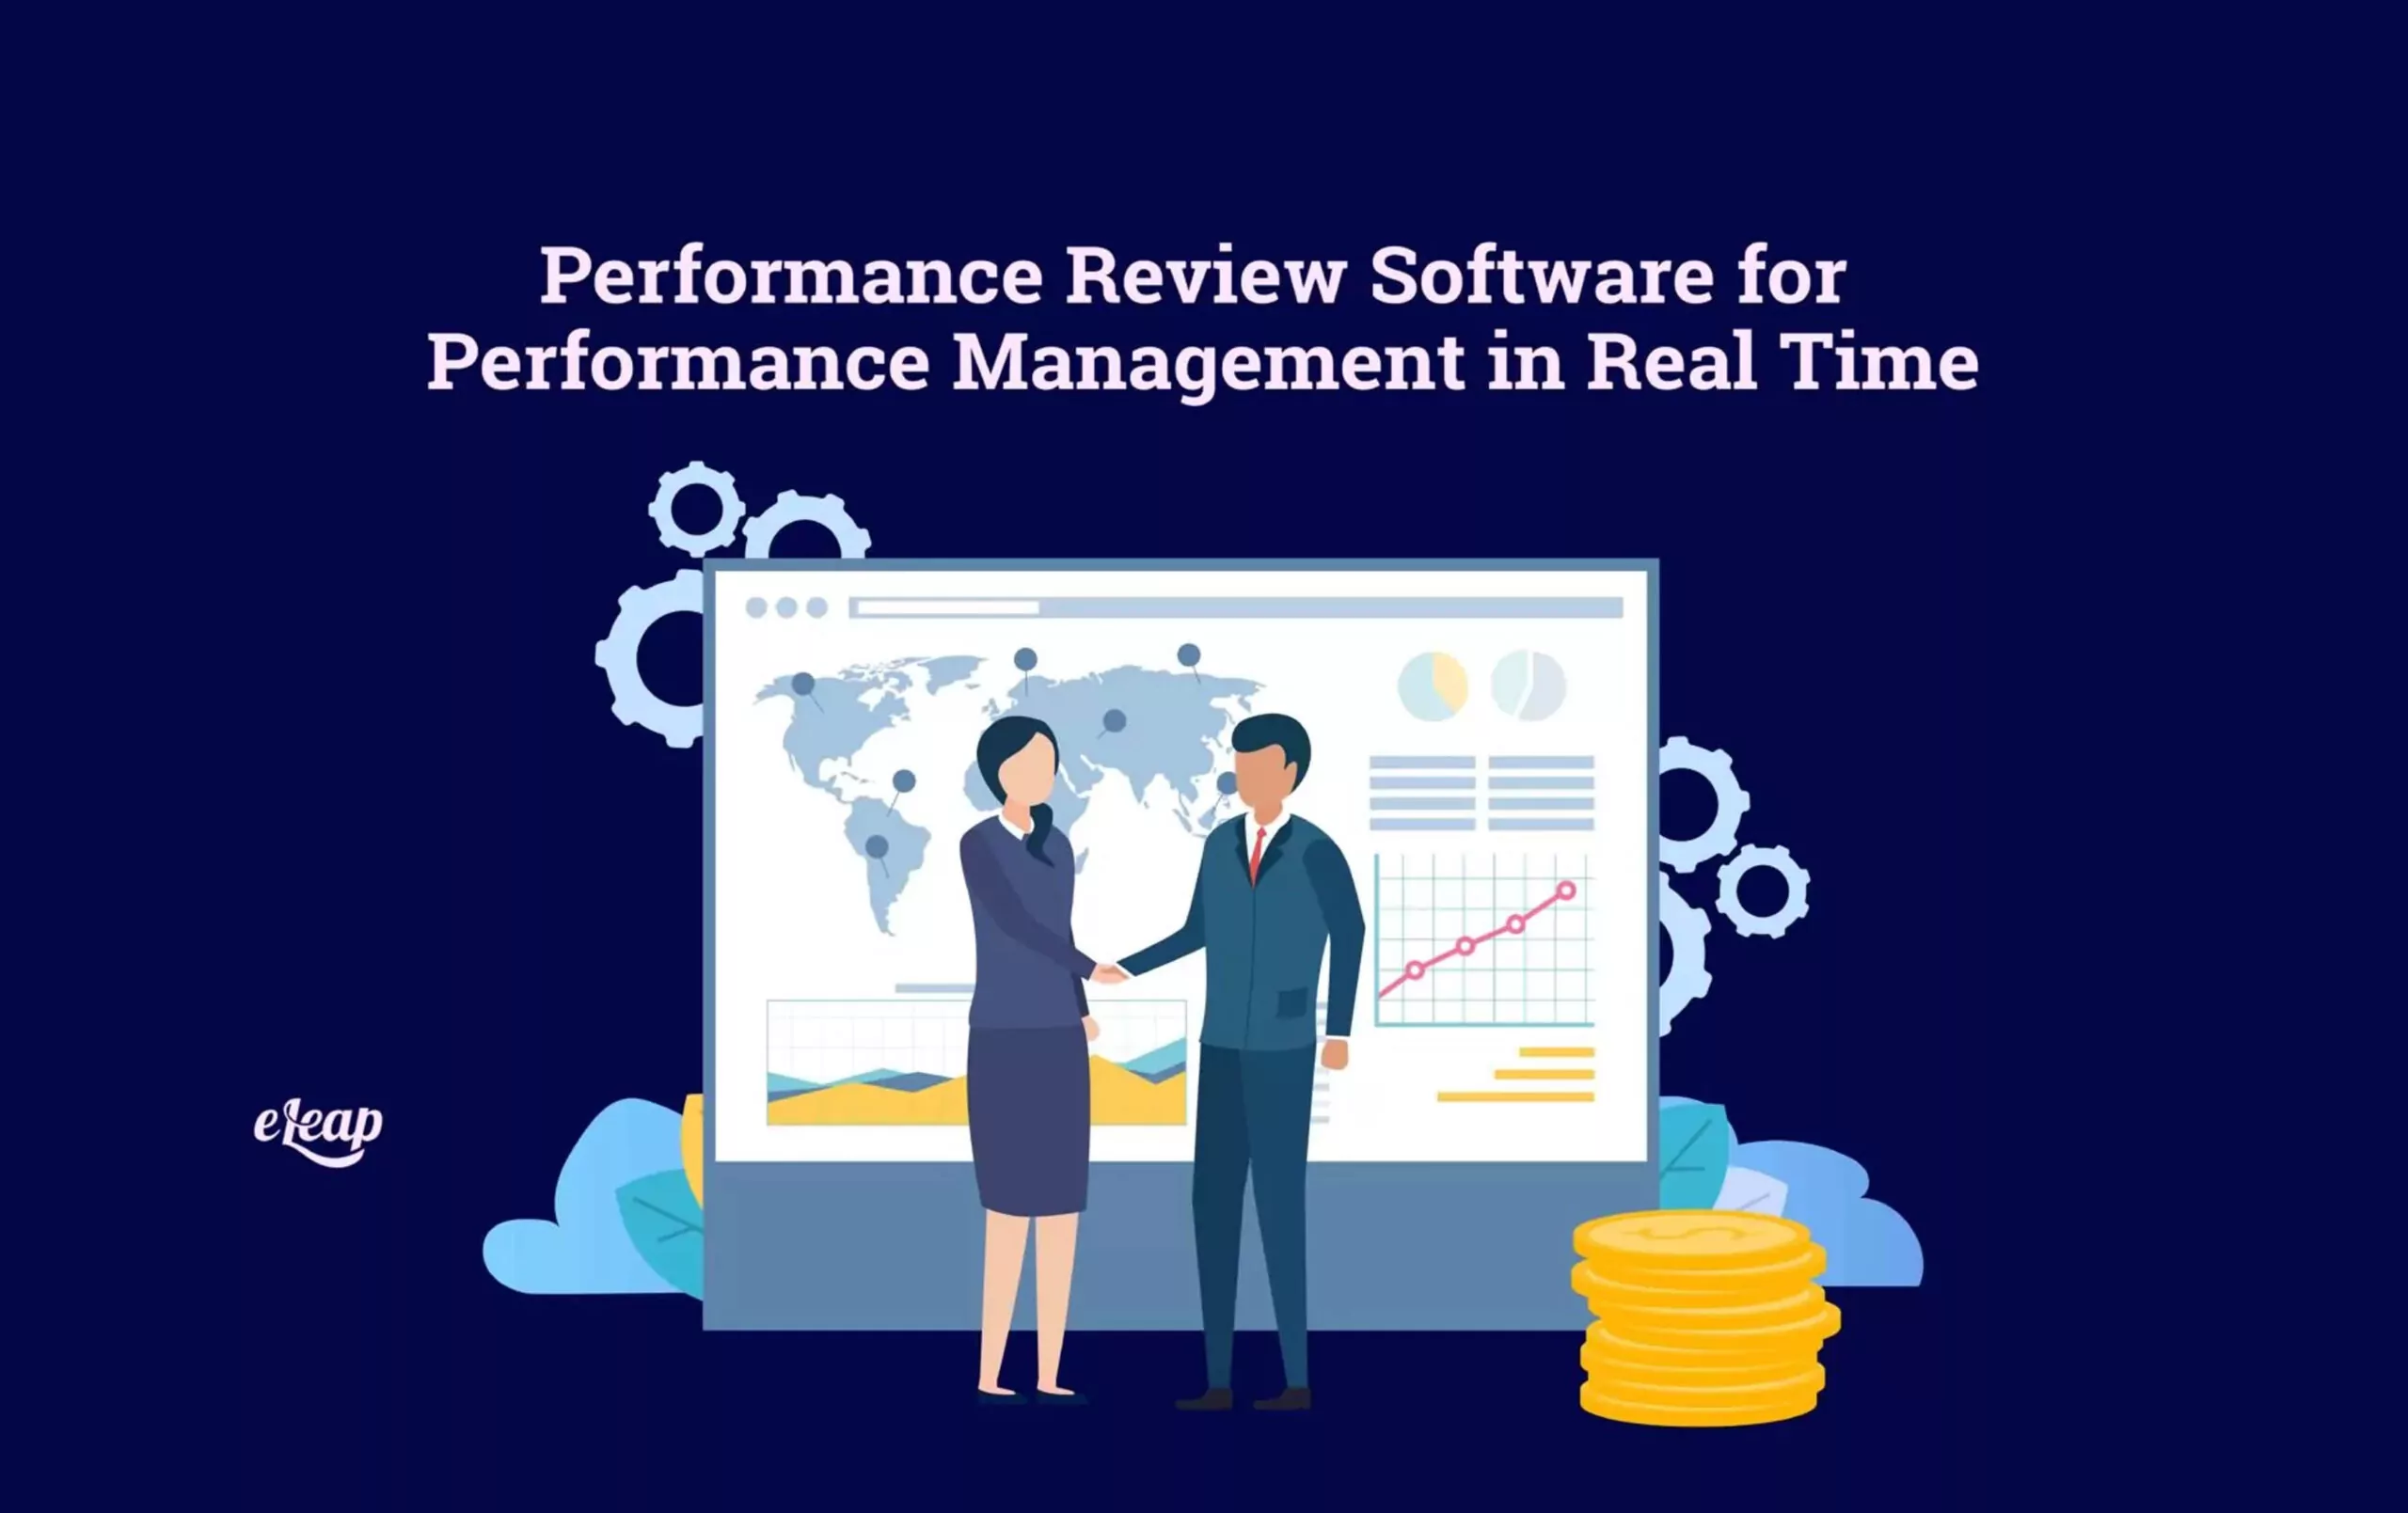 Performance Review Software